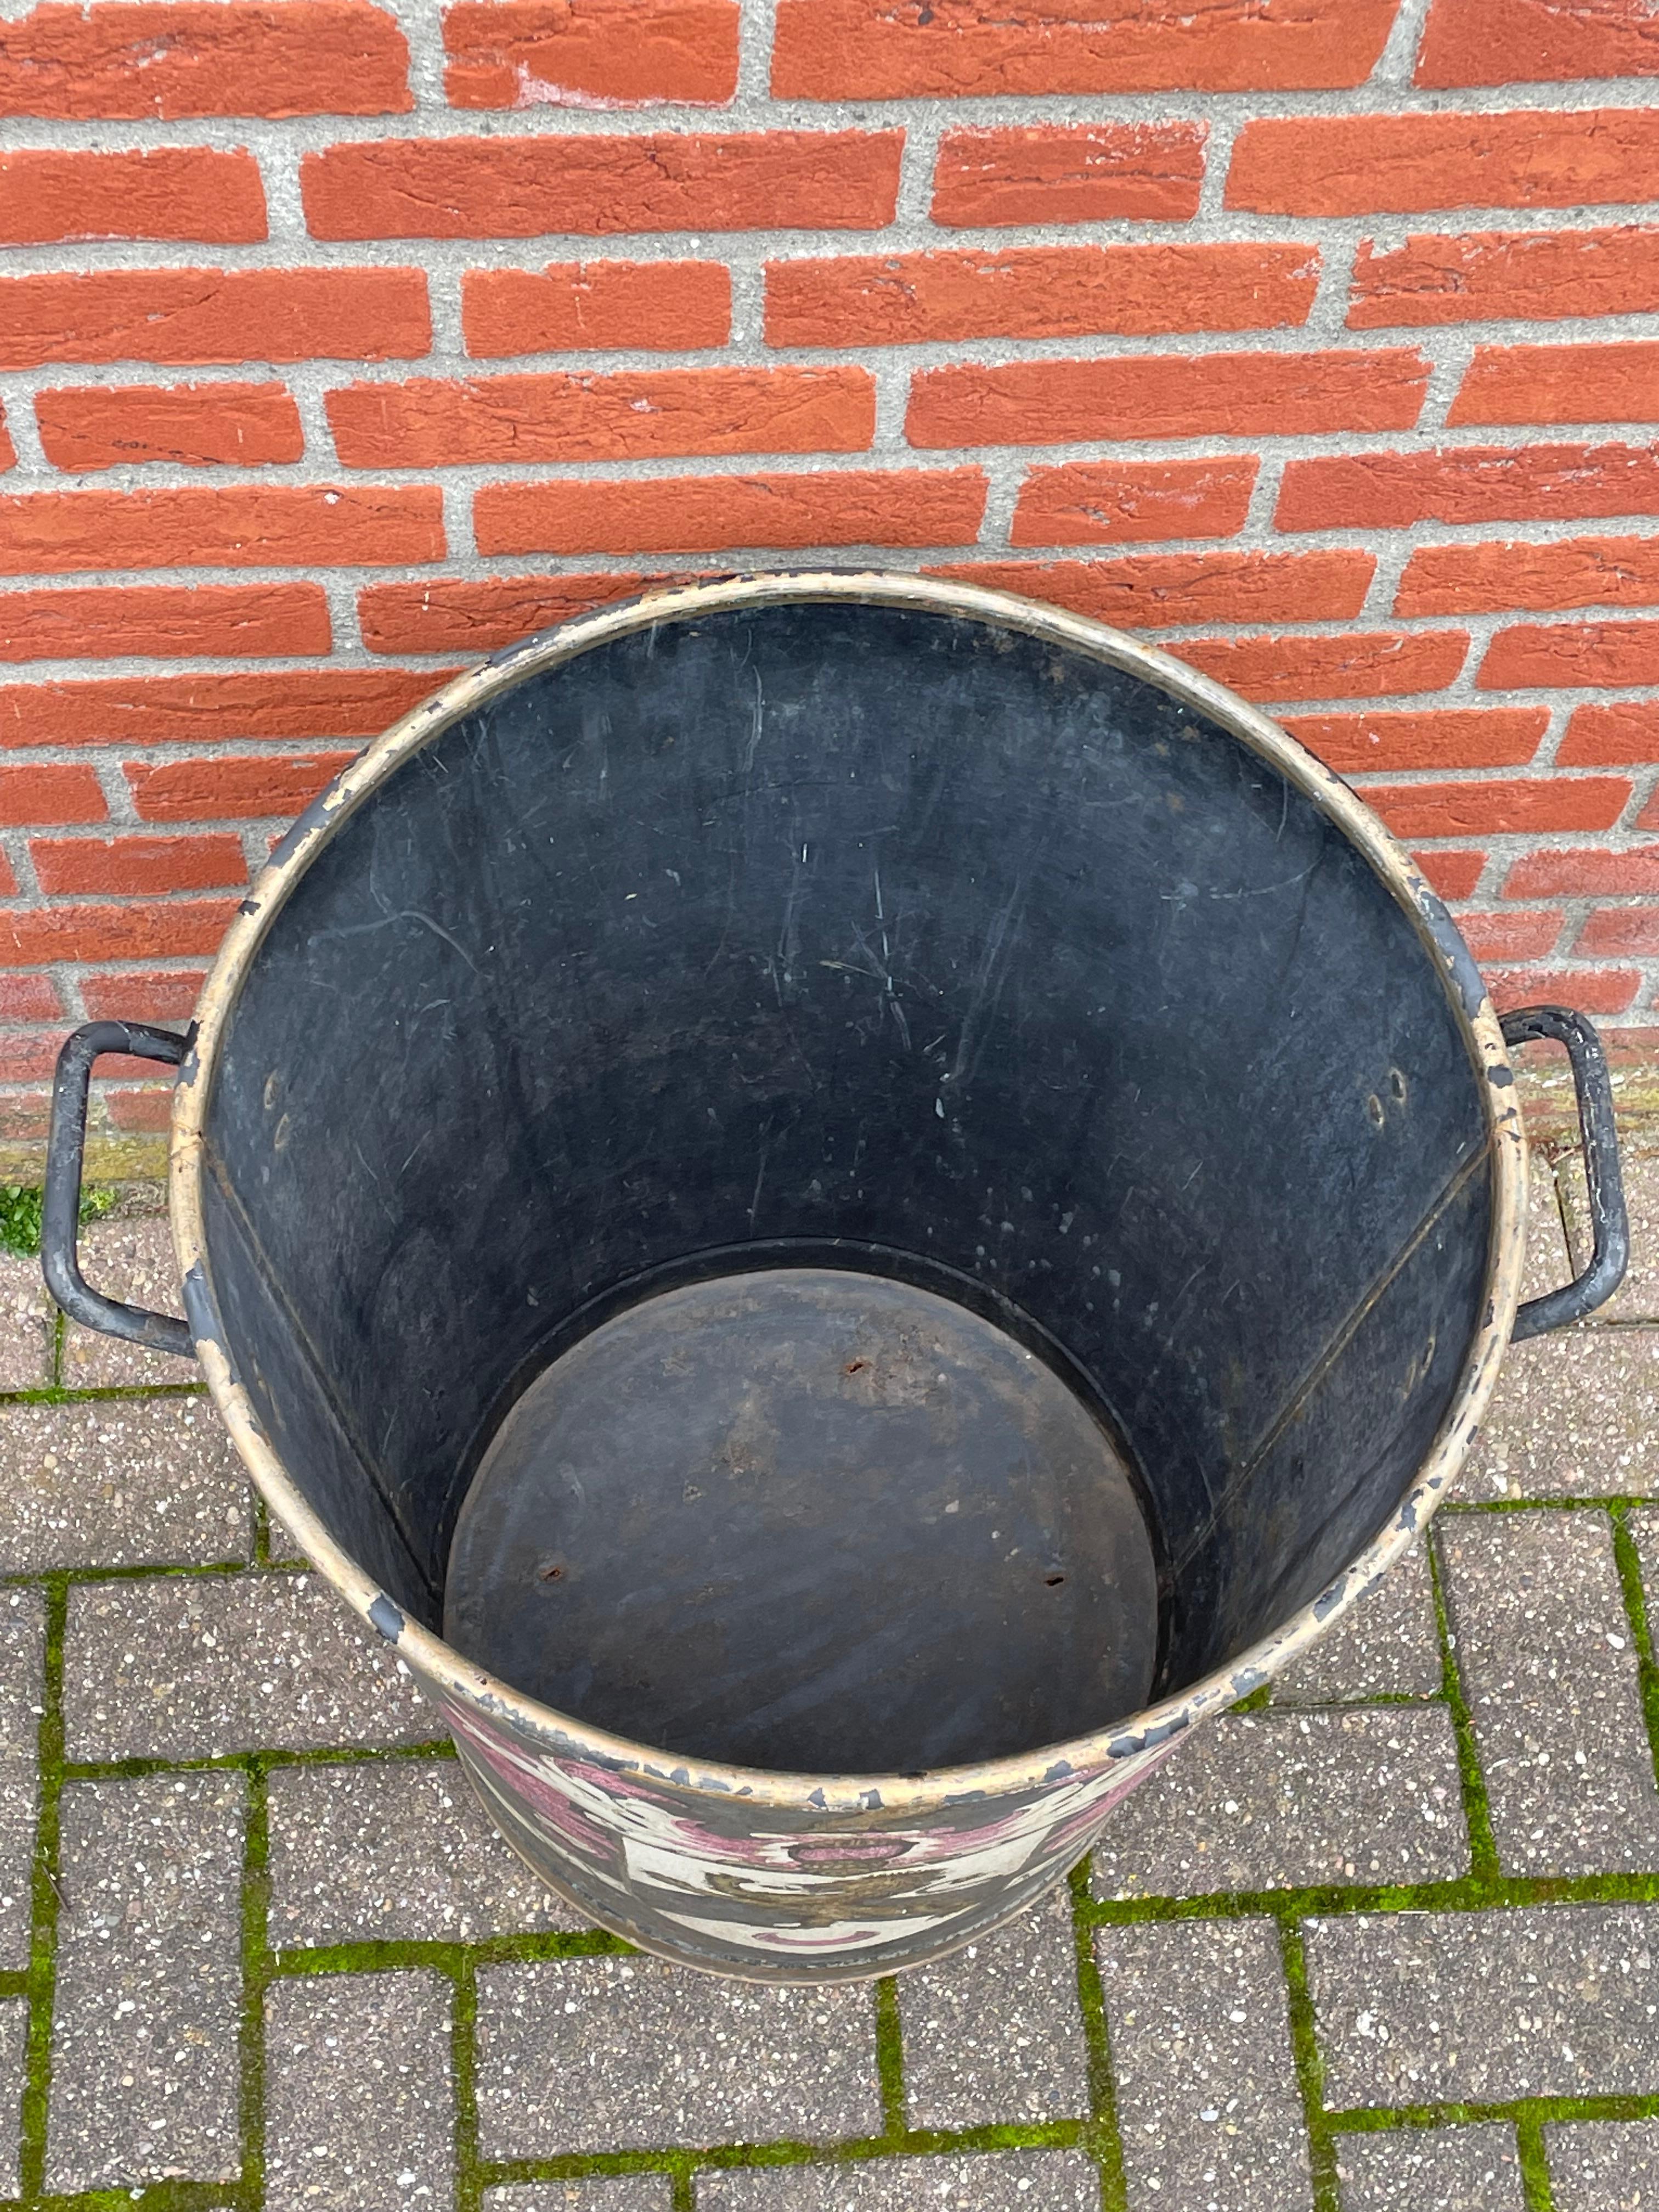 20th Century Largest Antique Firewood Bucket / Planter with British Crest 'God and My Right'